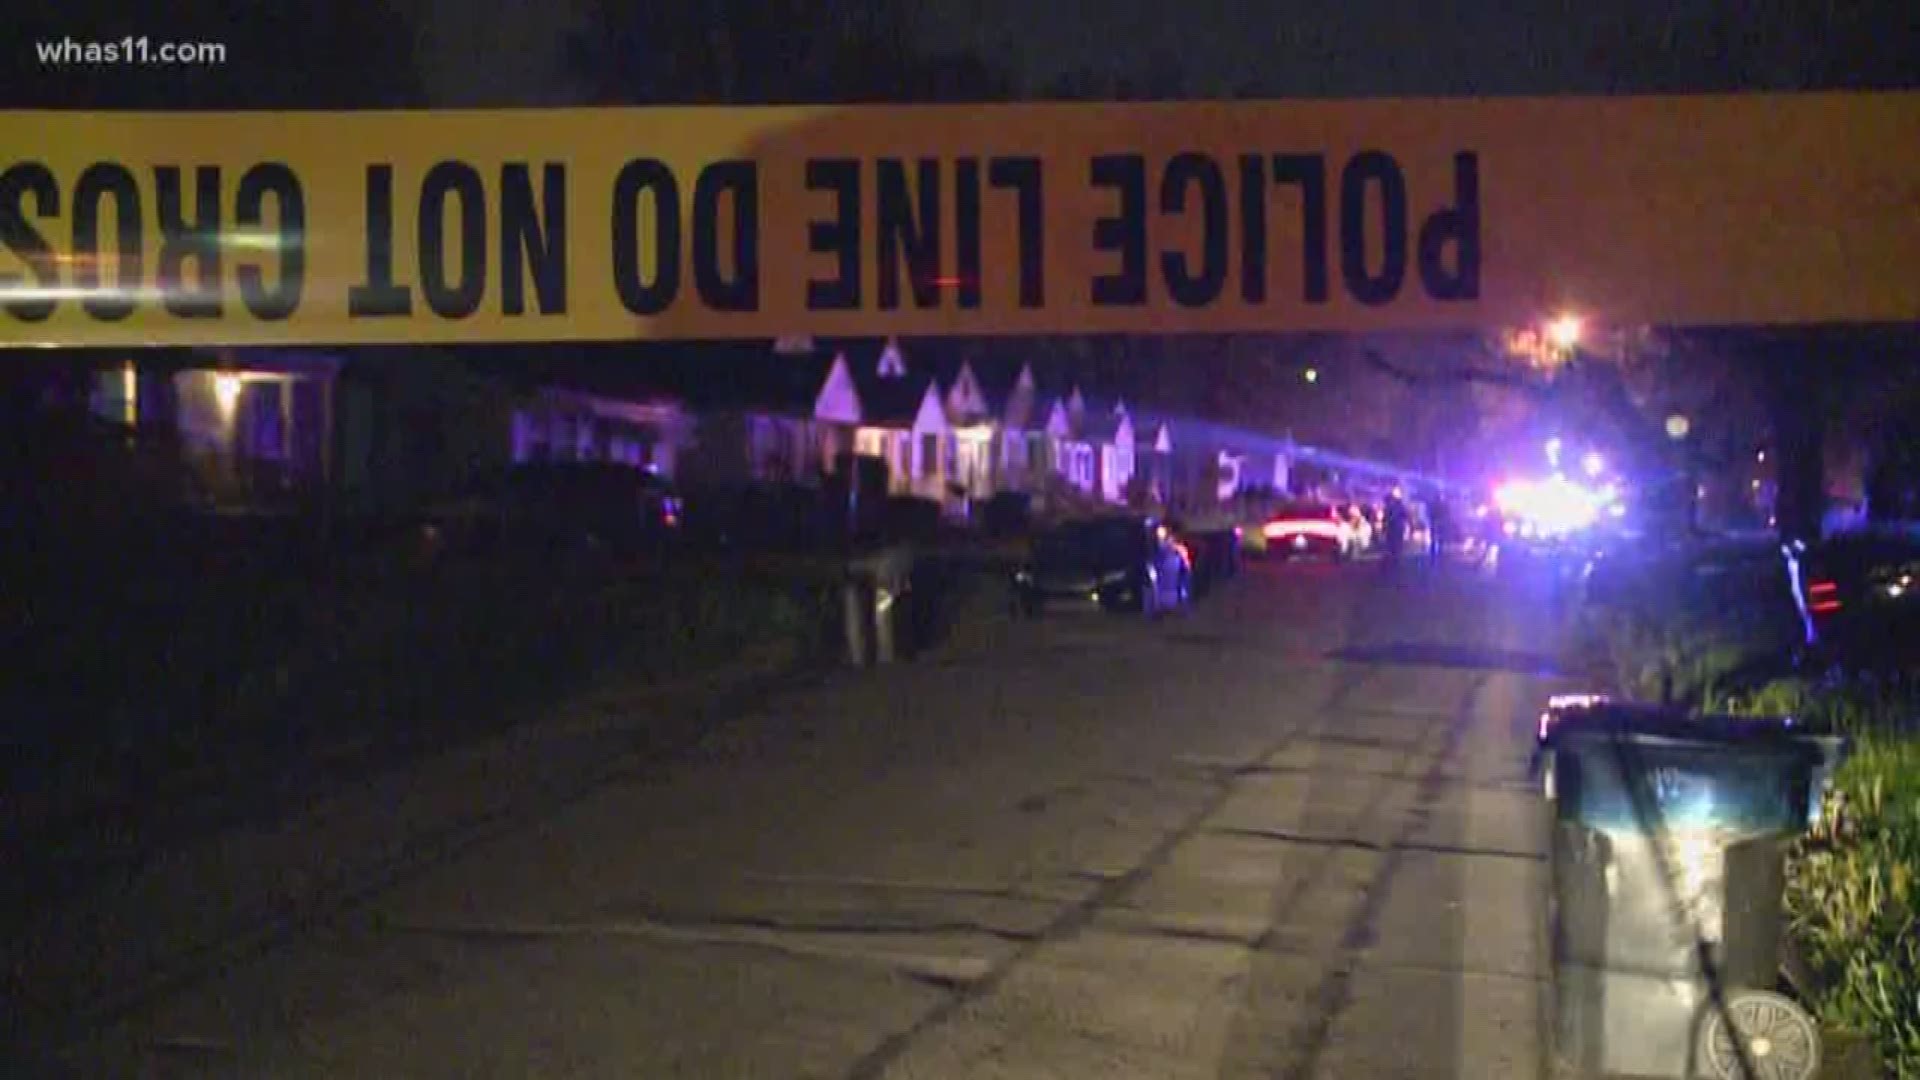 It was another deadly night involving shots fired by police officers. This time a deadly shooting happening in the Shawnee neighborhood.